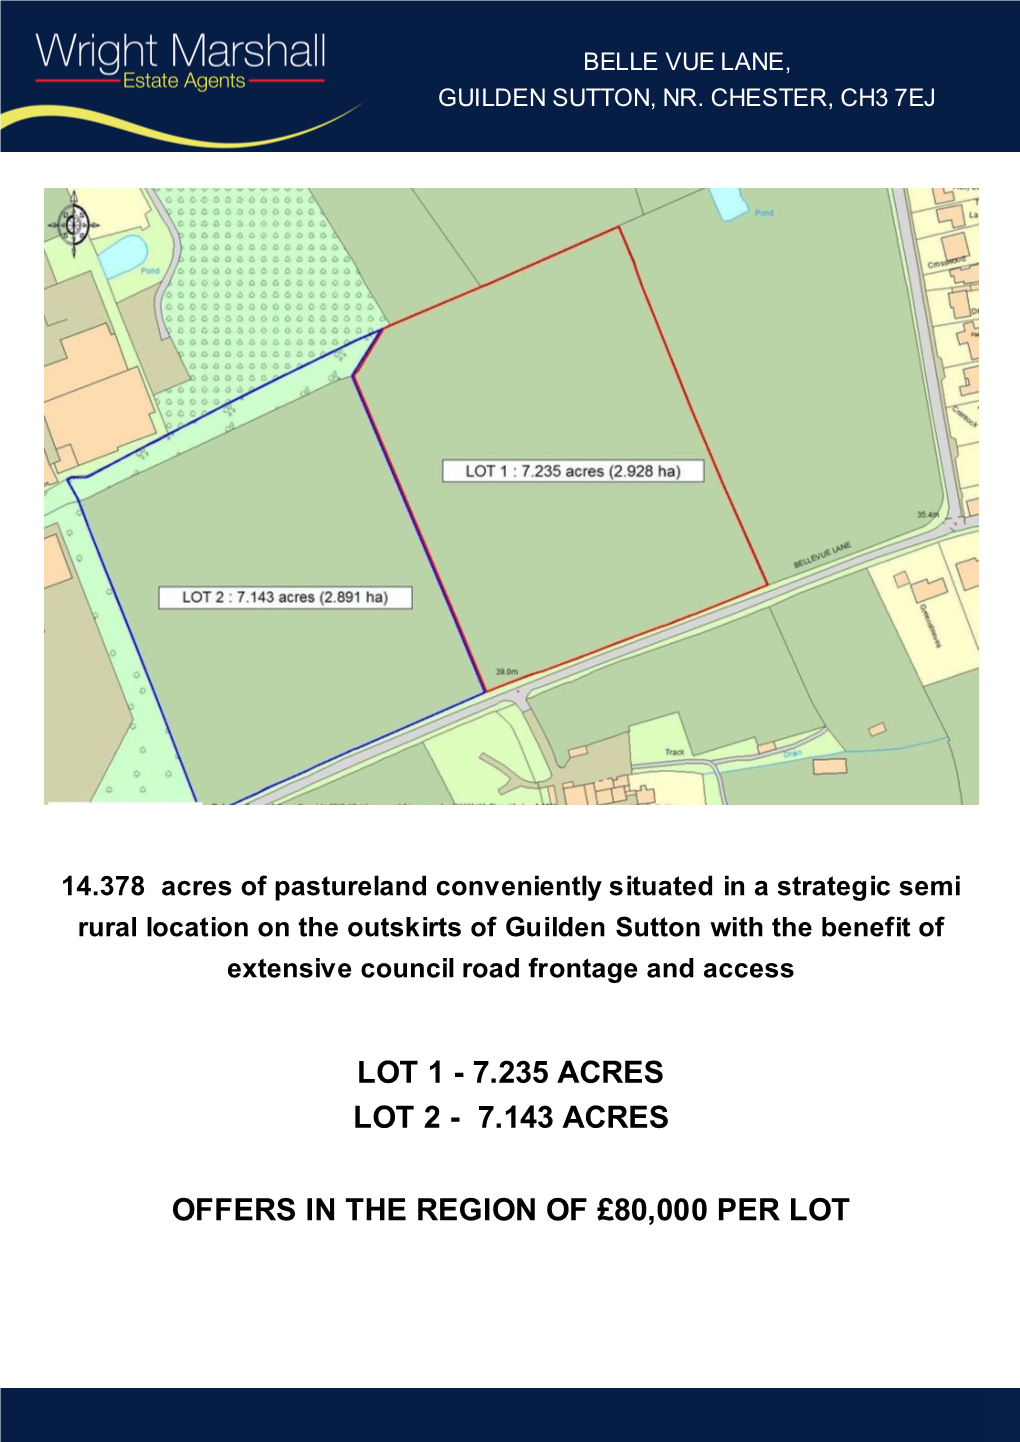 7.143 Acres Offers in the Region of £80000 Per